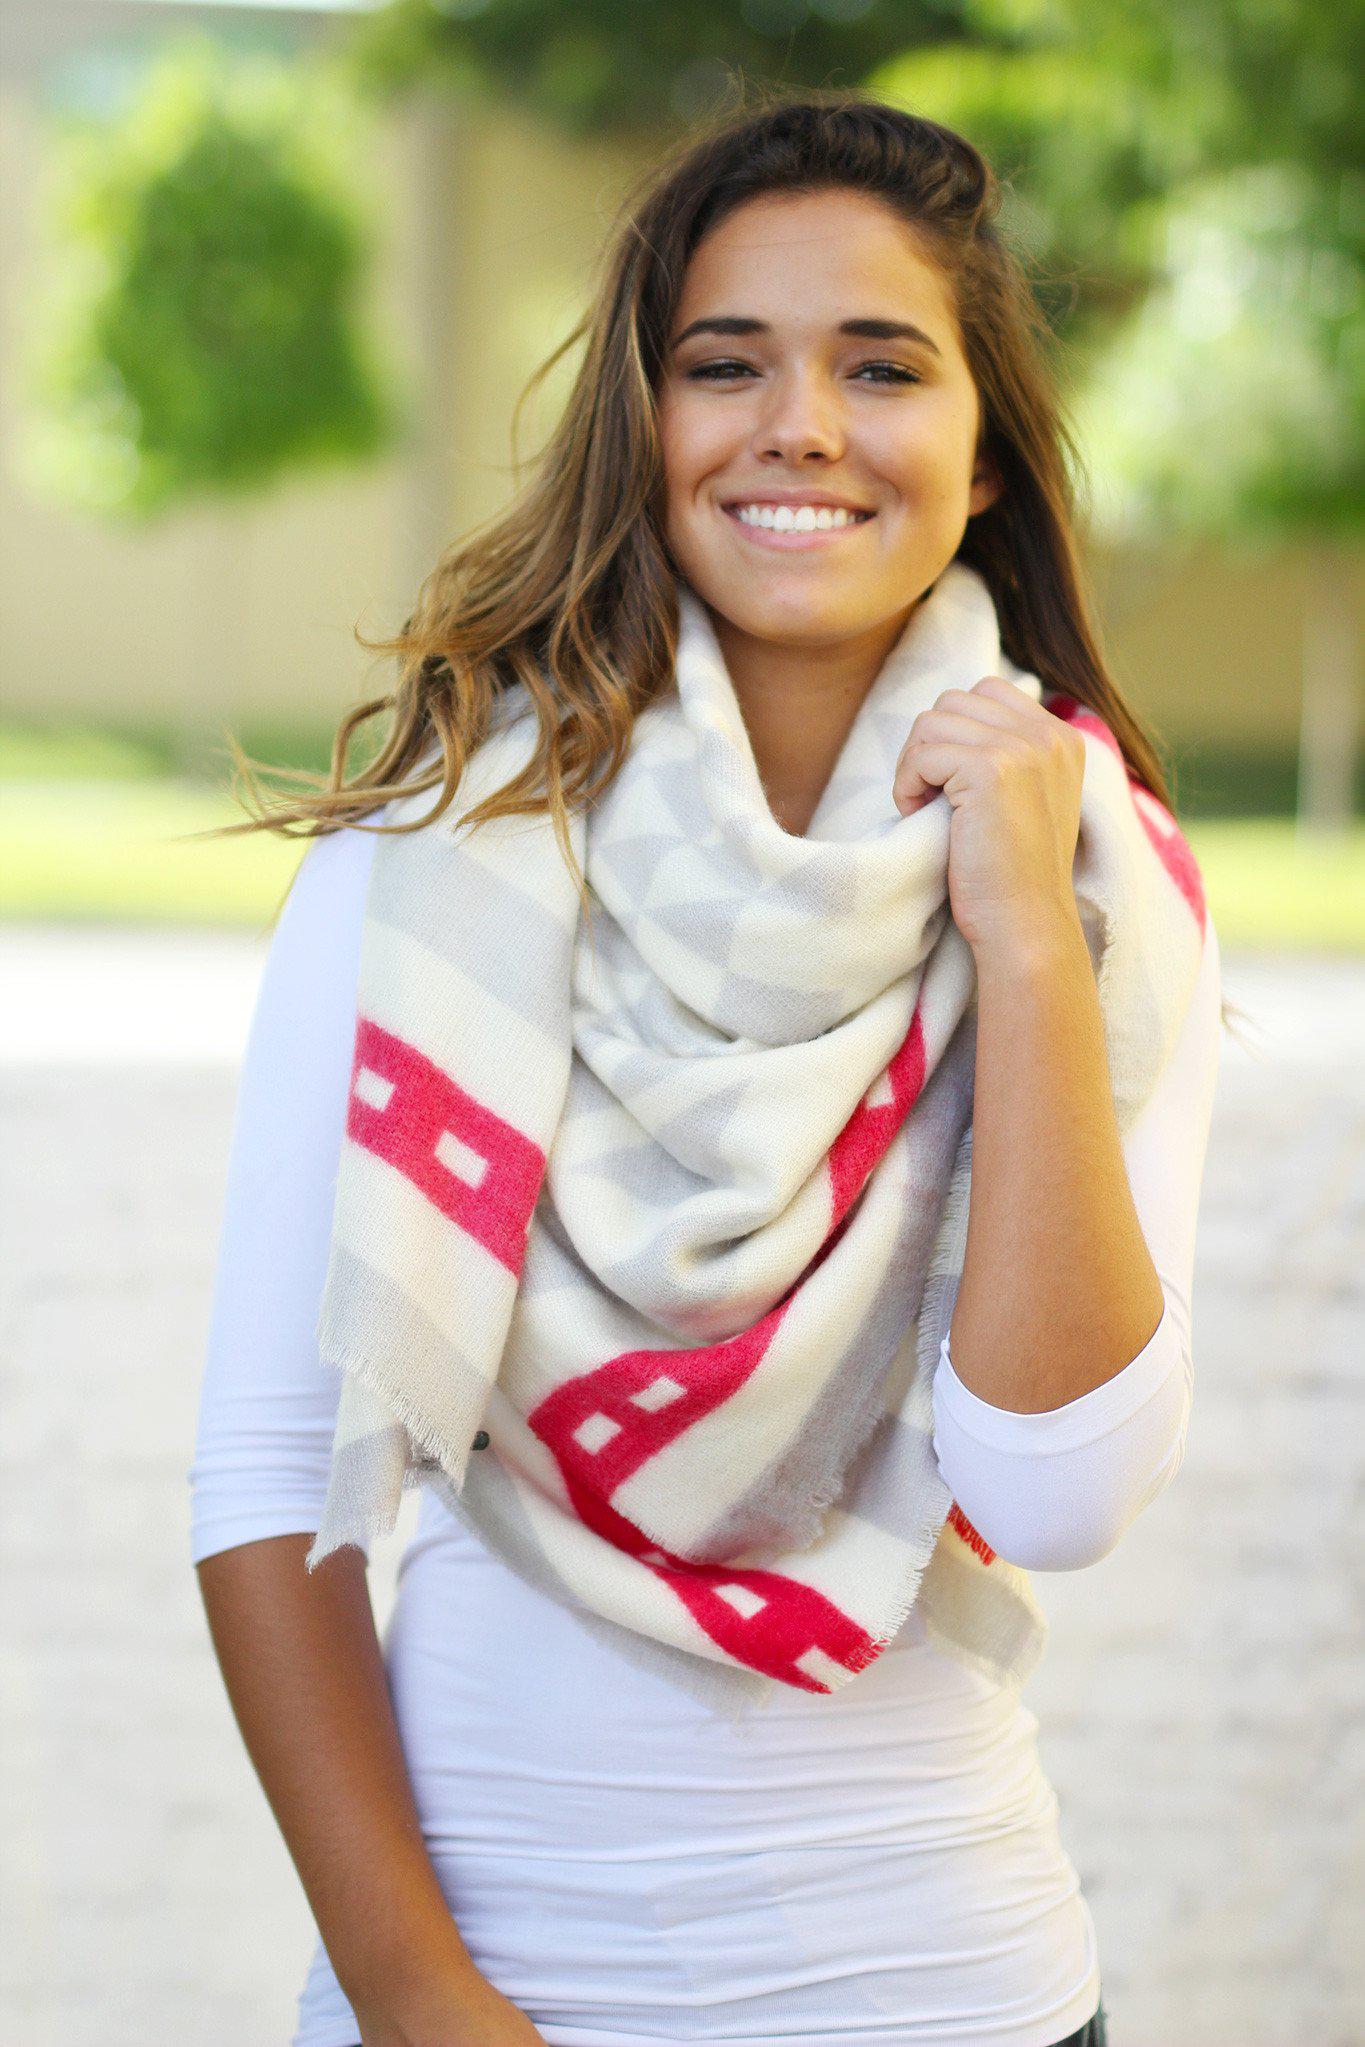 Ivory and Gray Blanket Scarf